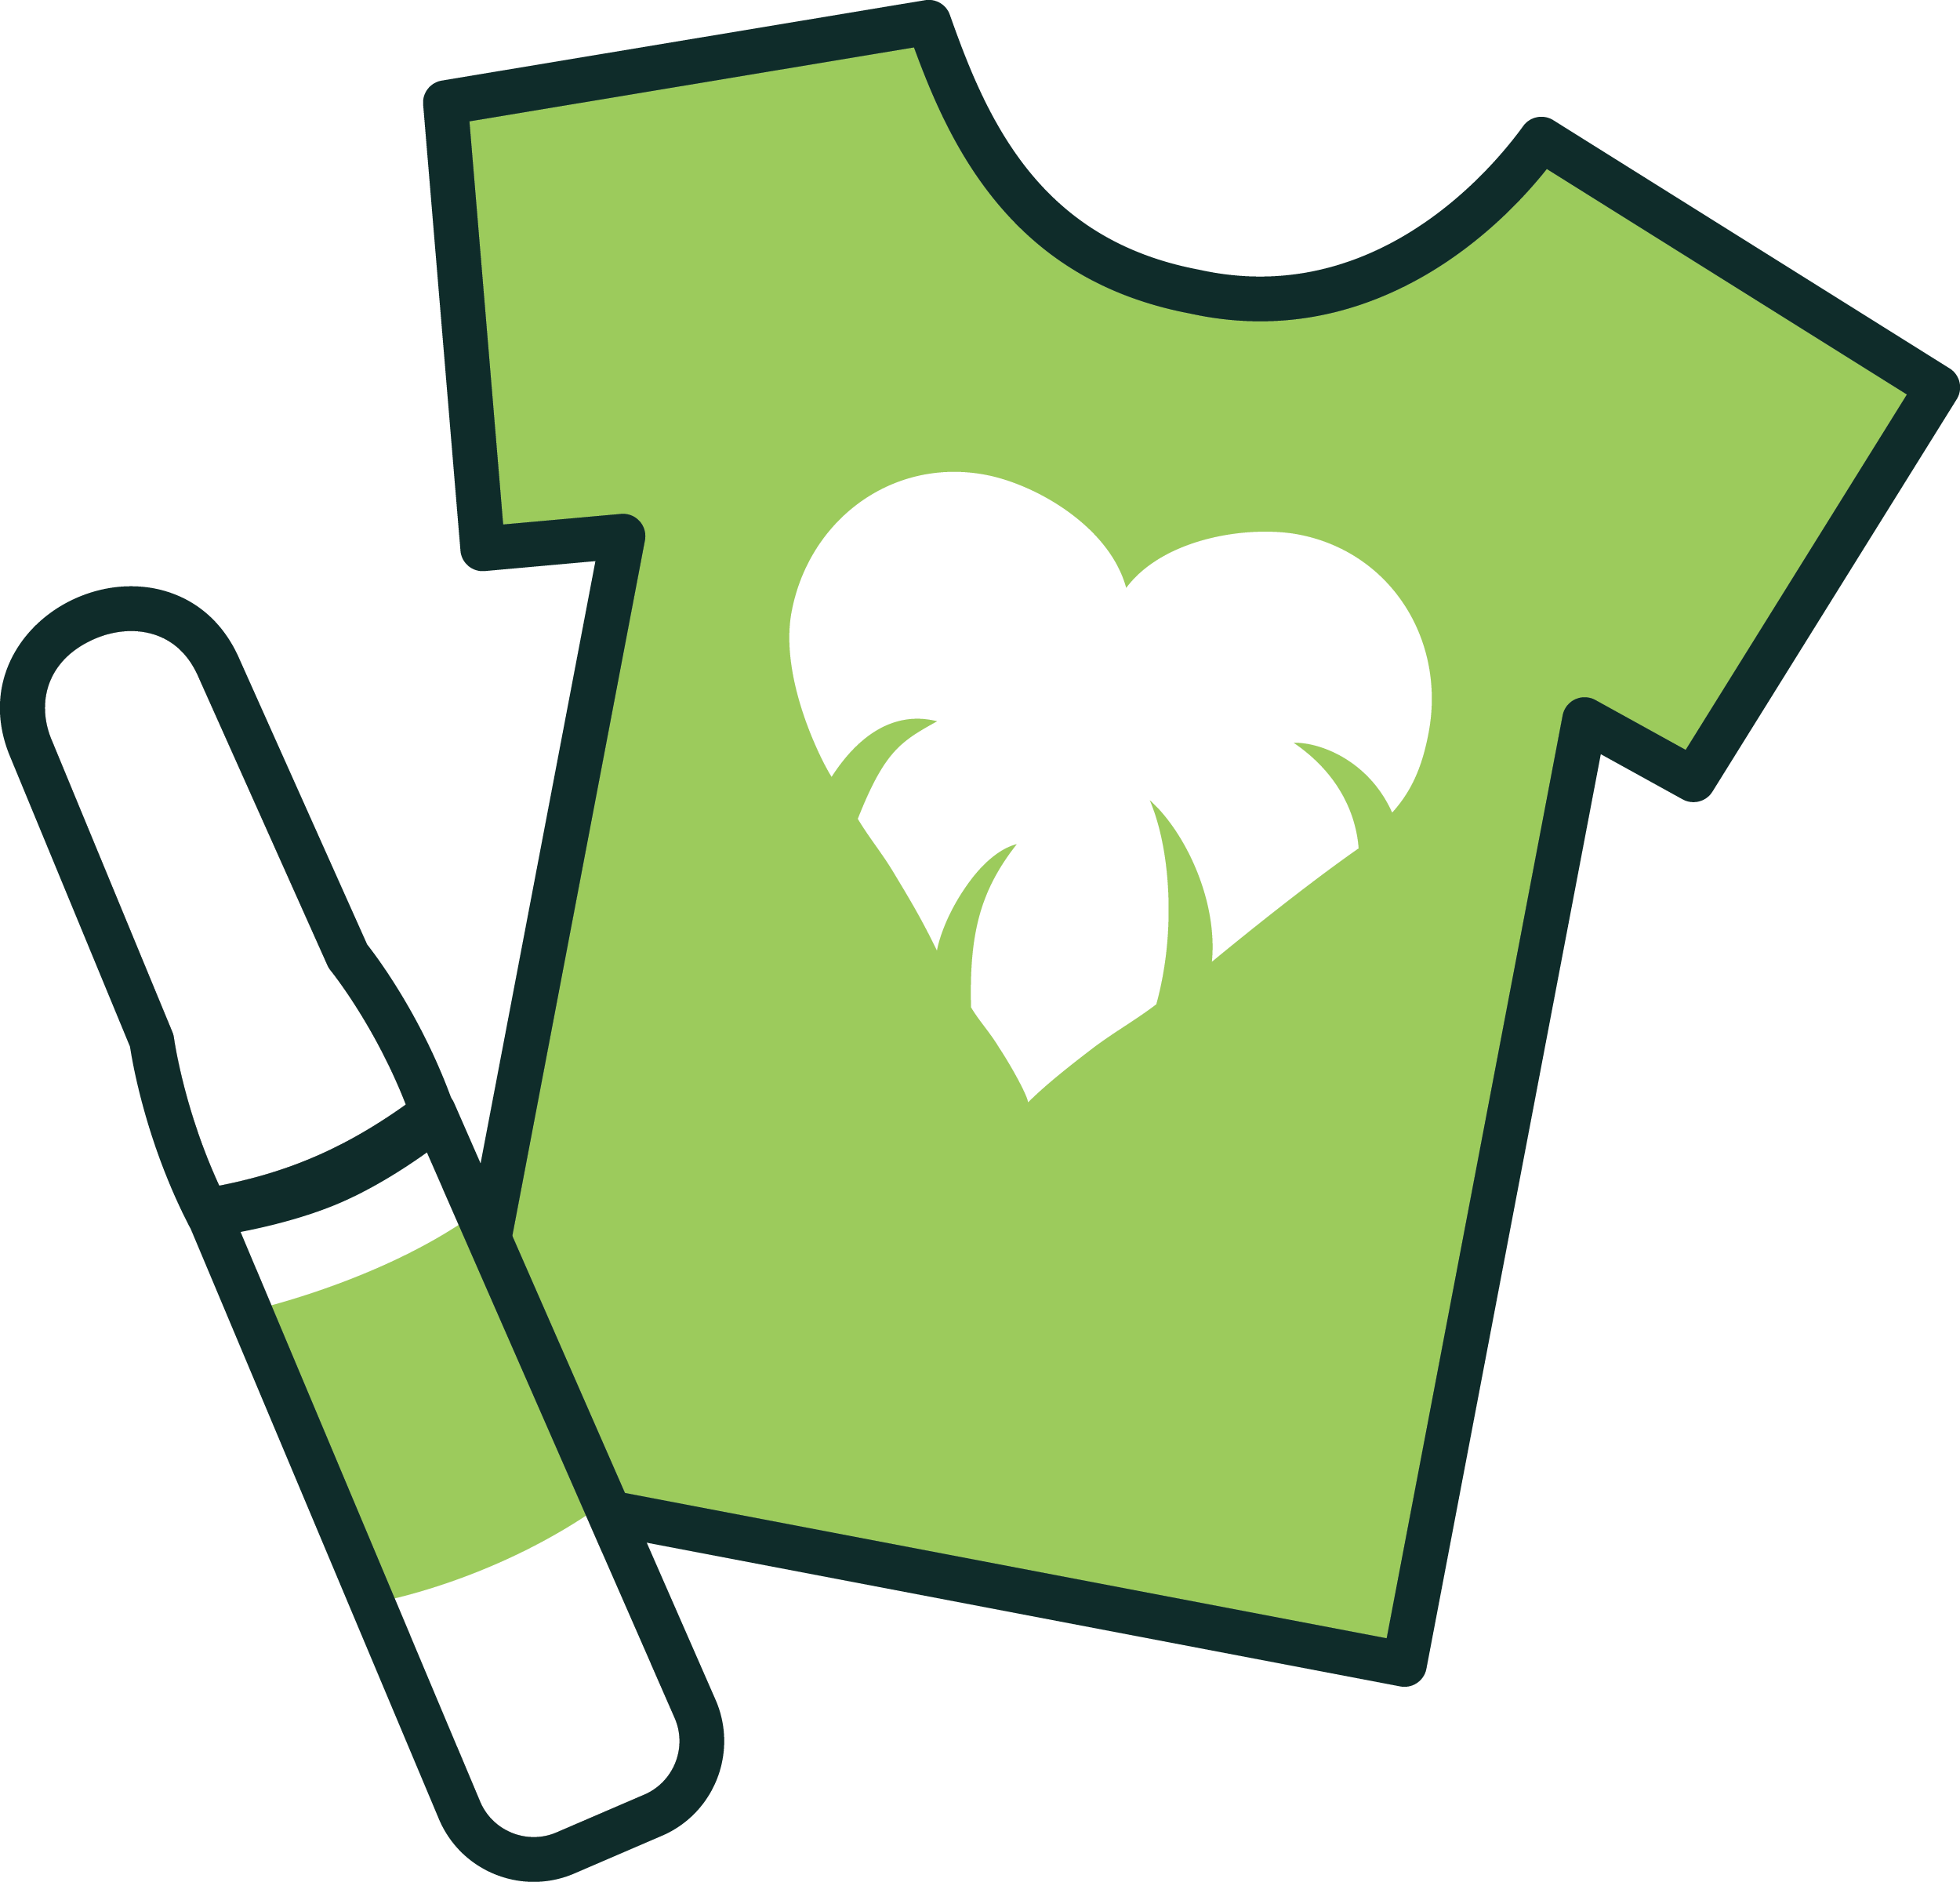 a green t - shirt with a white heart on it.